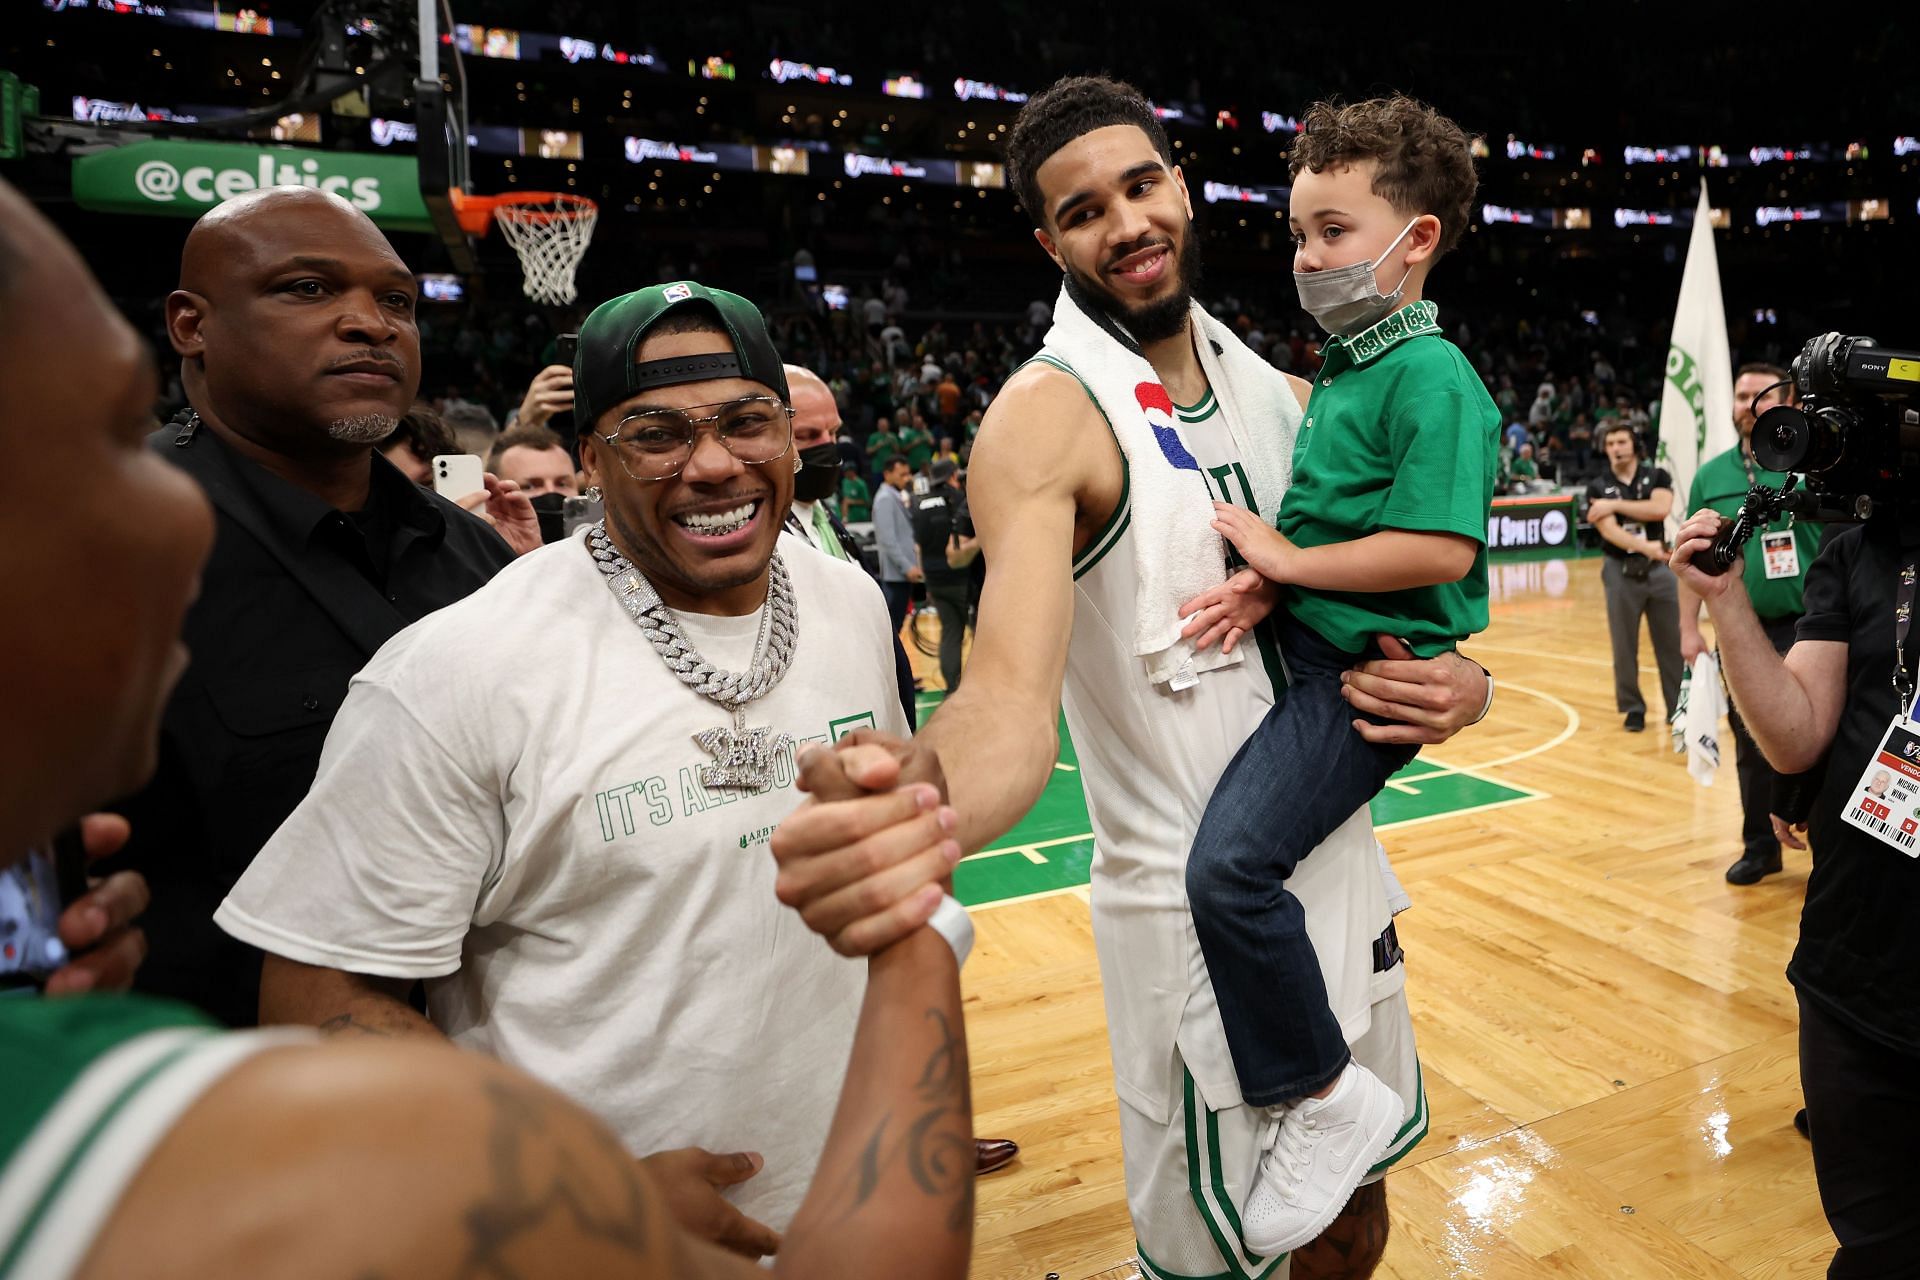 Who is Deuce Tatum and what's his connection to NBA? Here are all the